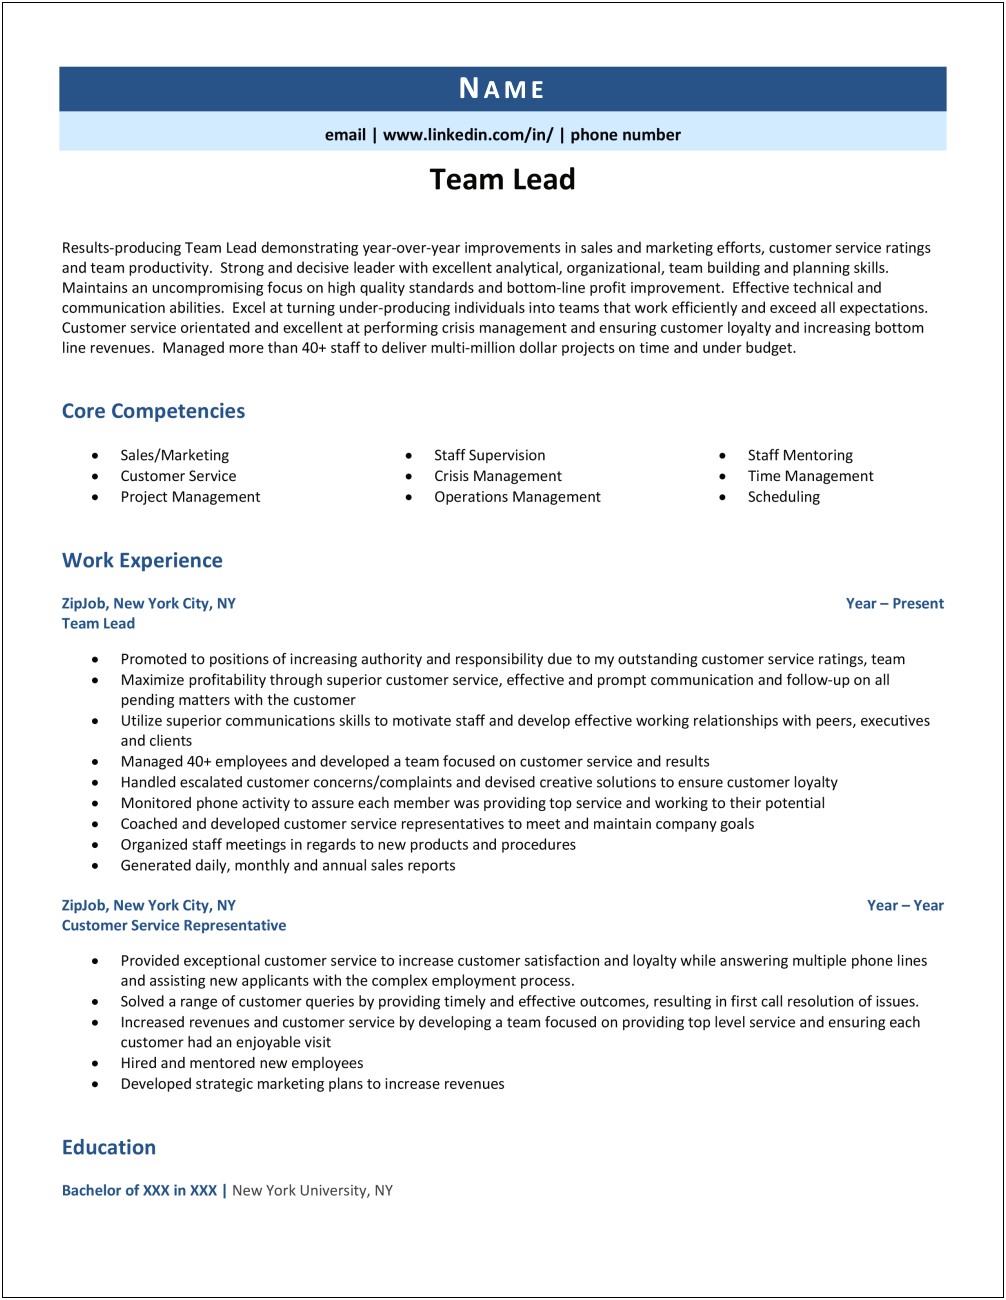 Example Of Leading A Team On A Resume